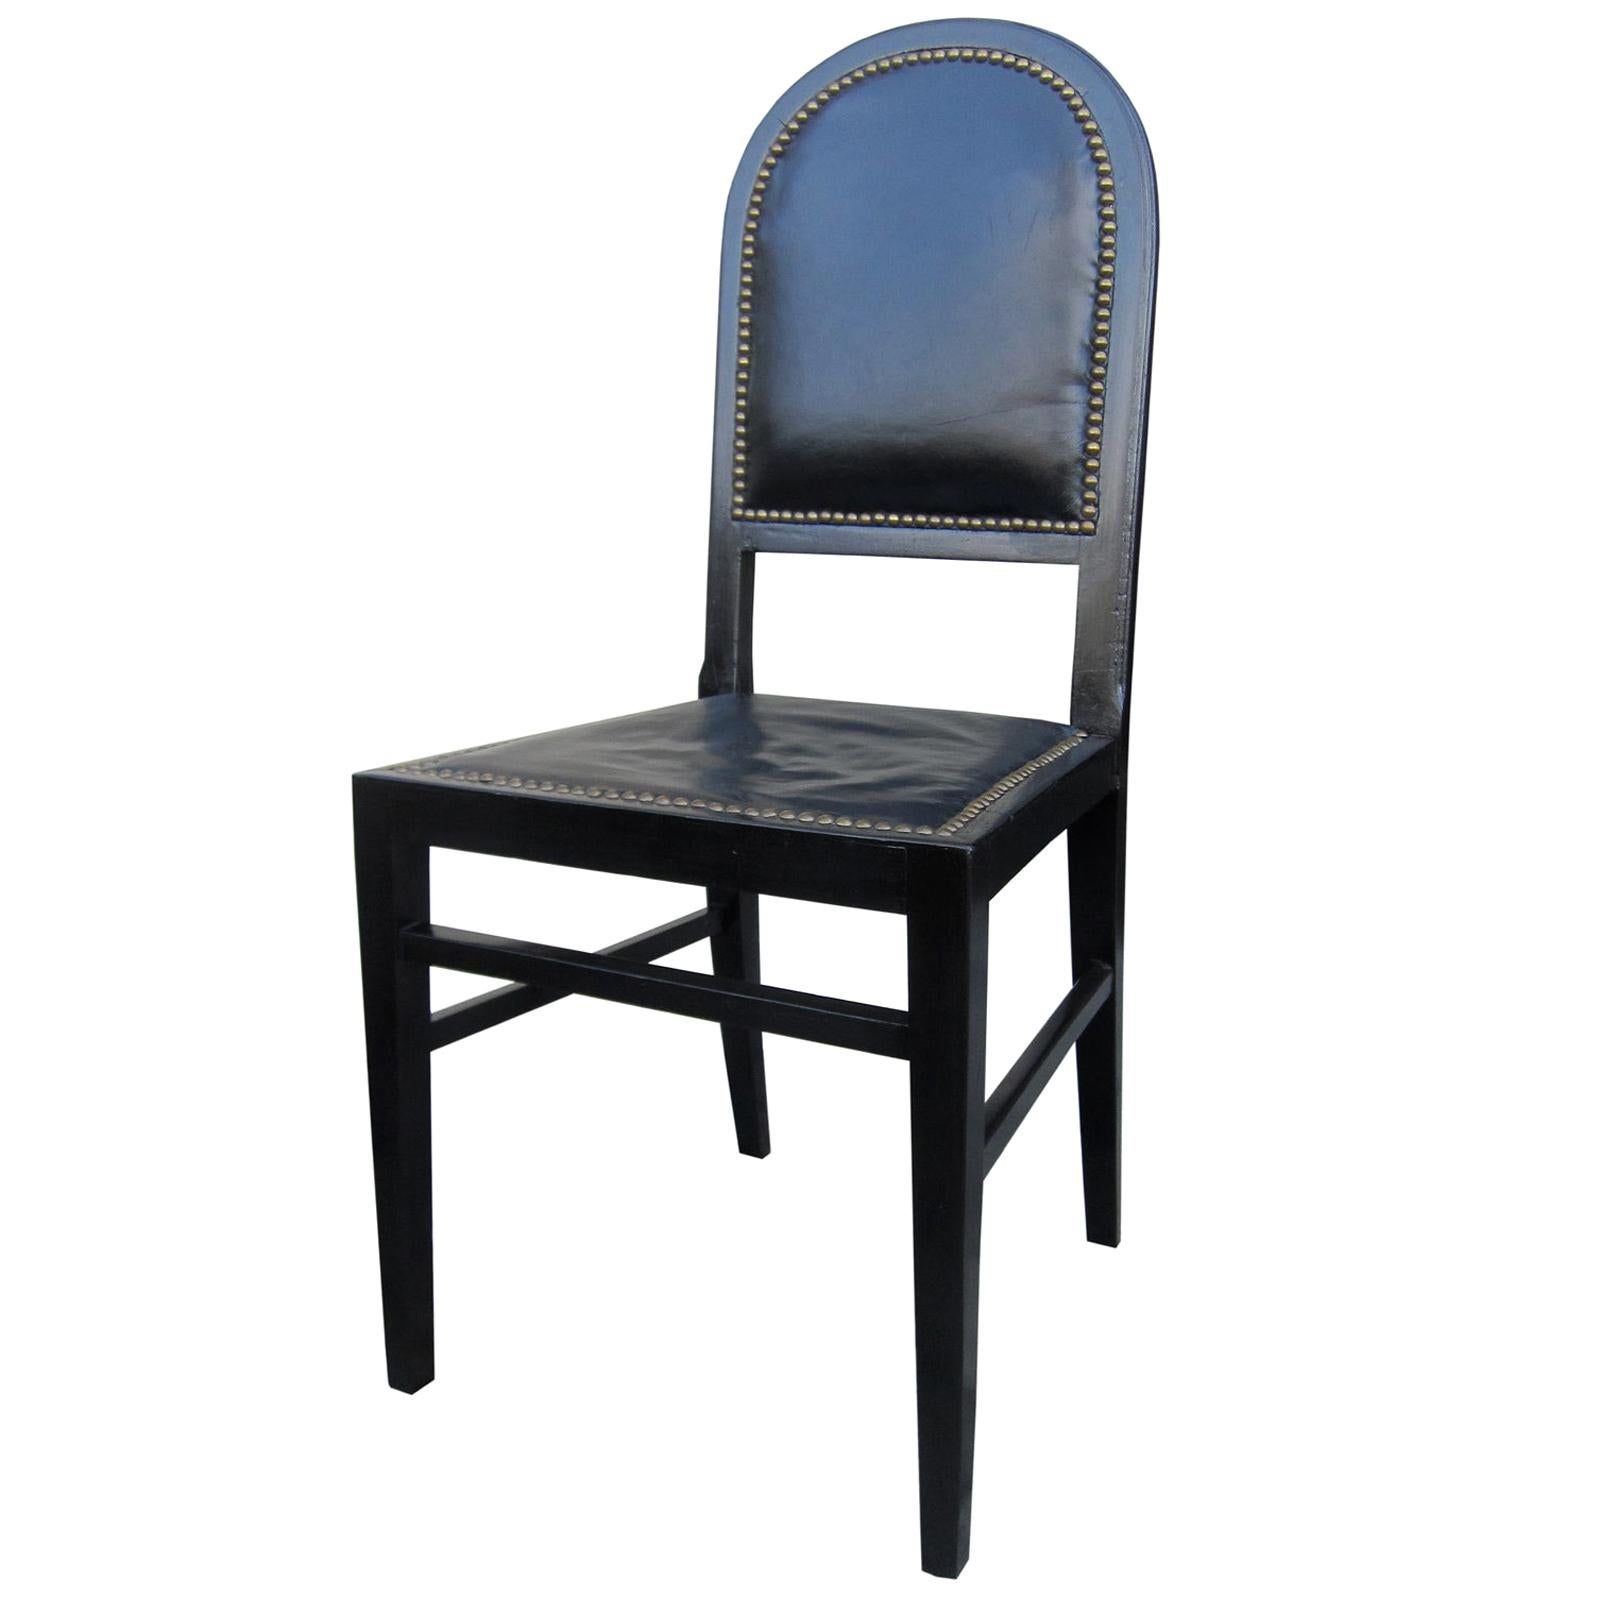 19th-20th Century Black Leather Desk / Side Chair with Nailheads For Sale